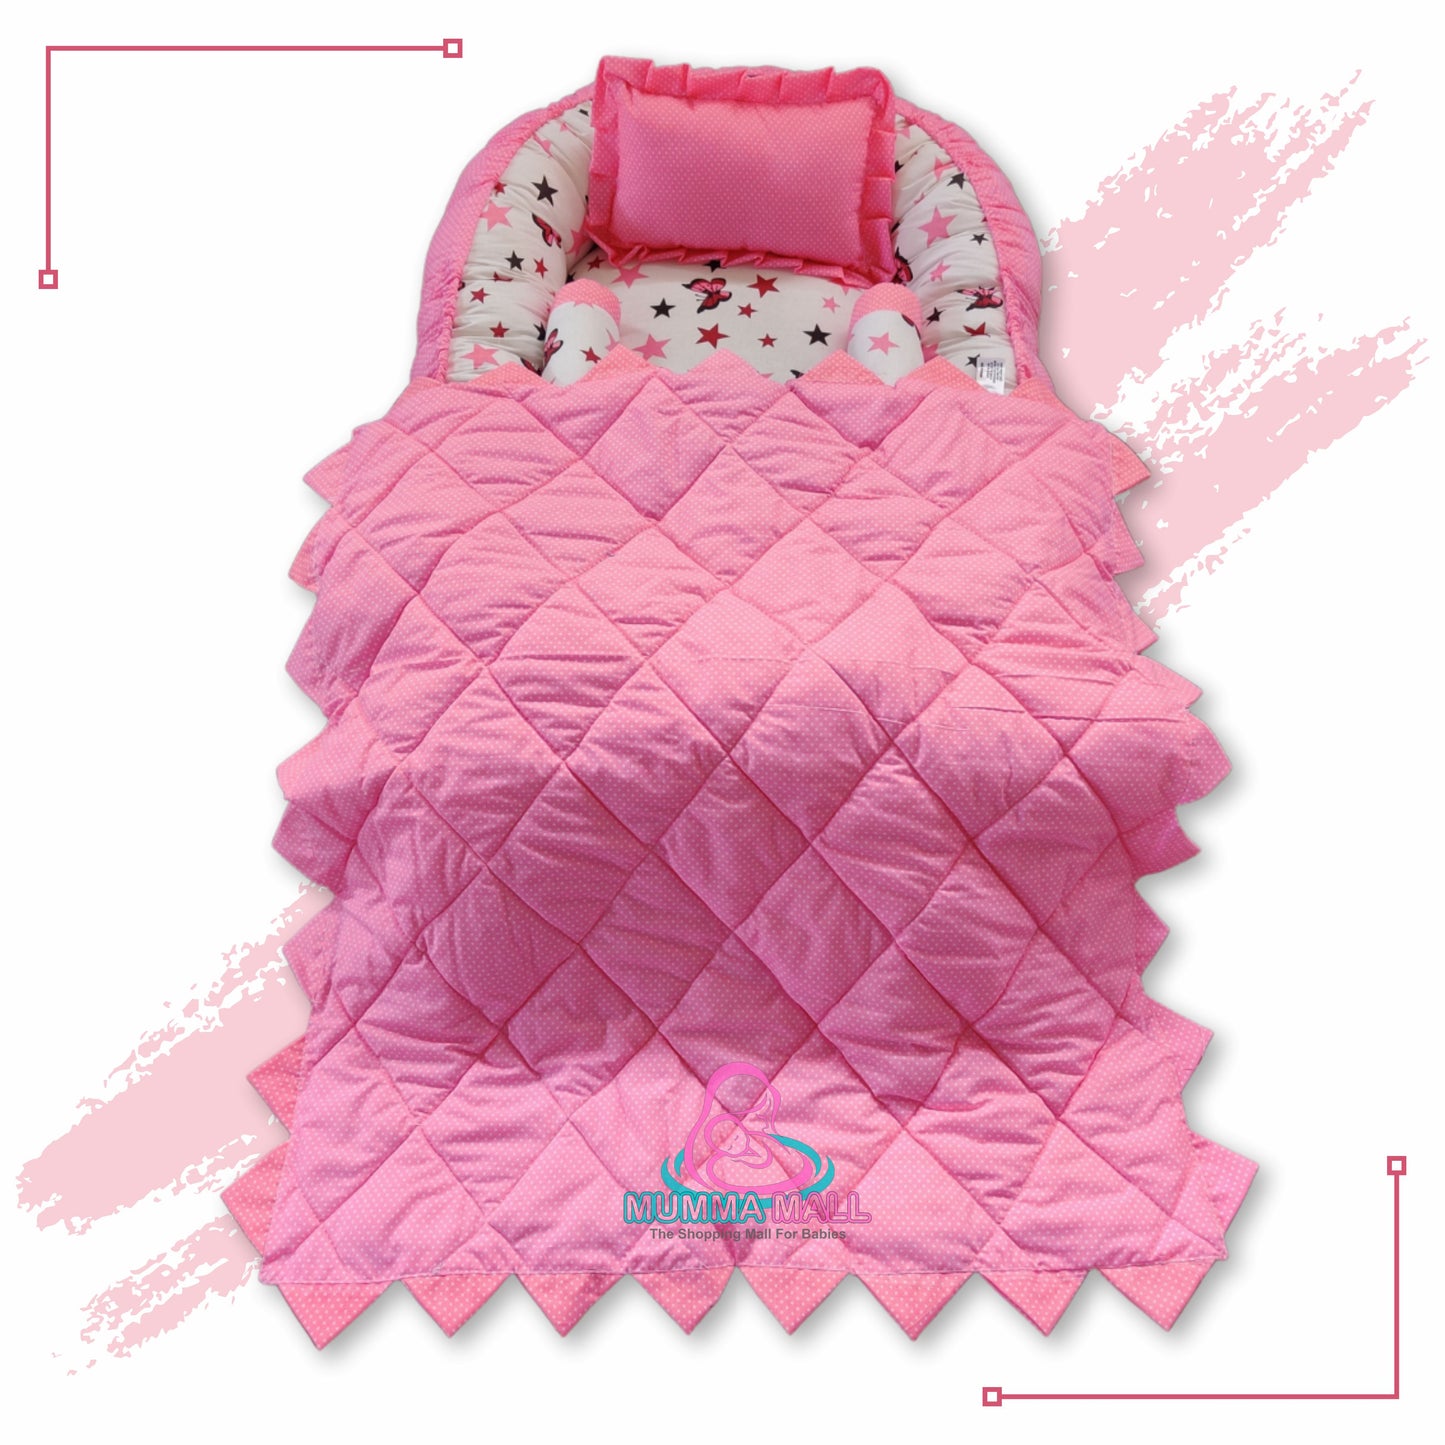 Baby nest bedding with blanket and set of 3 pillows as neck support, side support and toy (Pink and White)